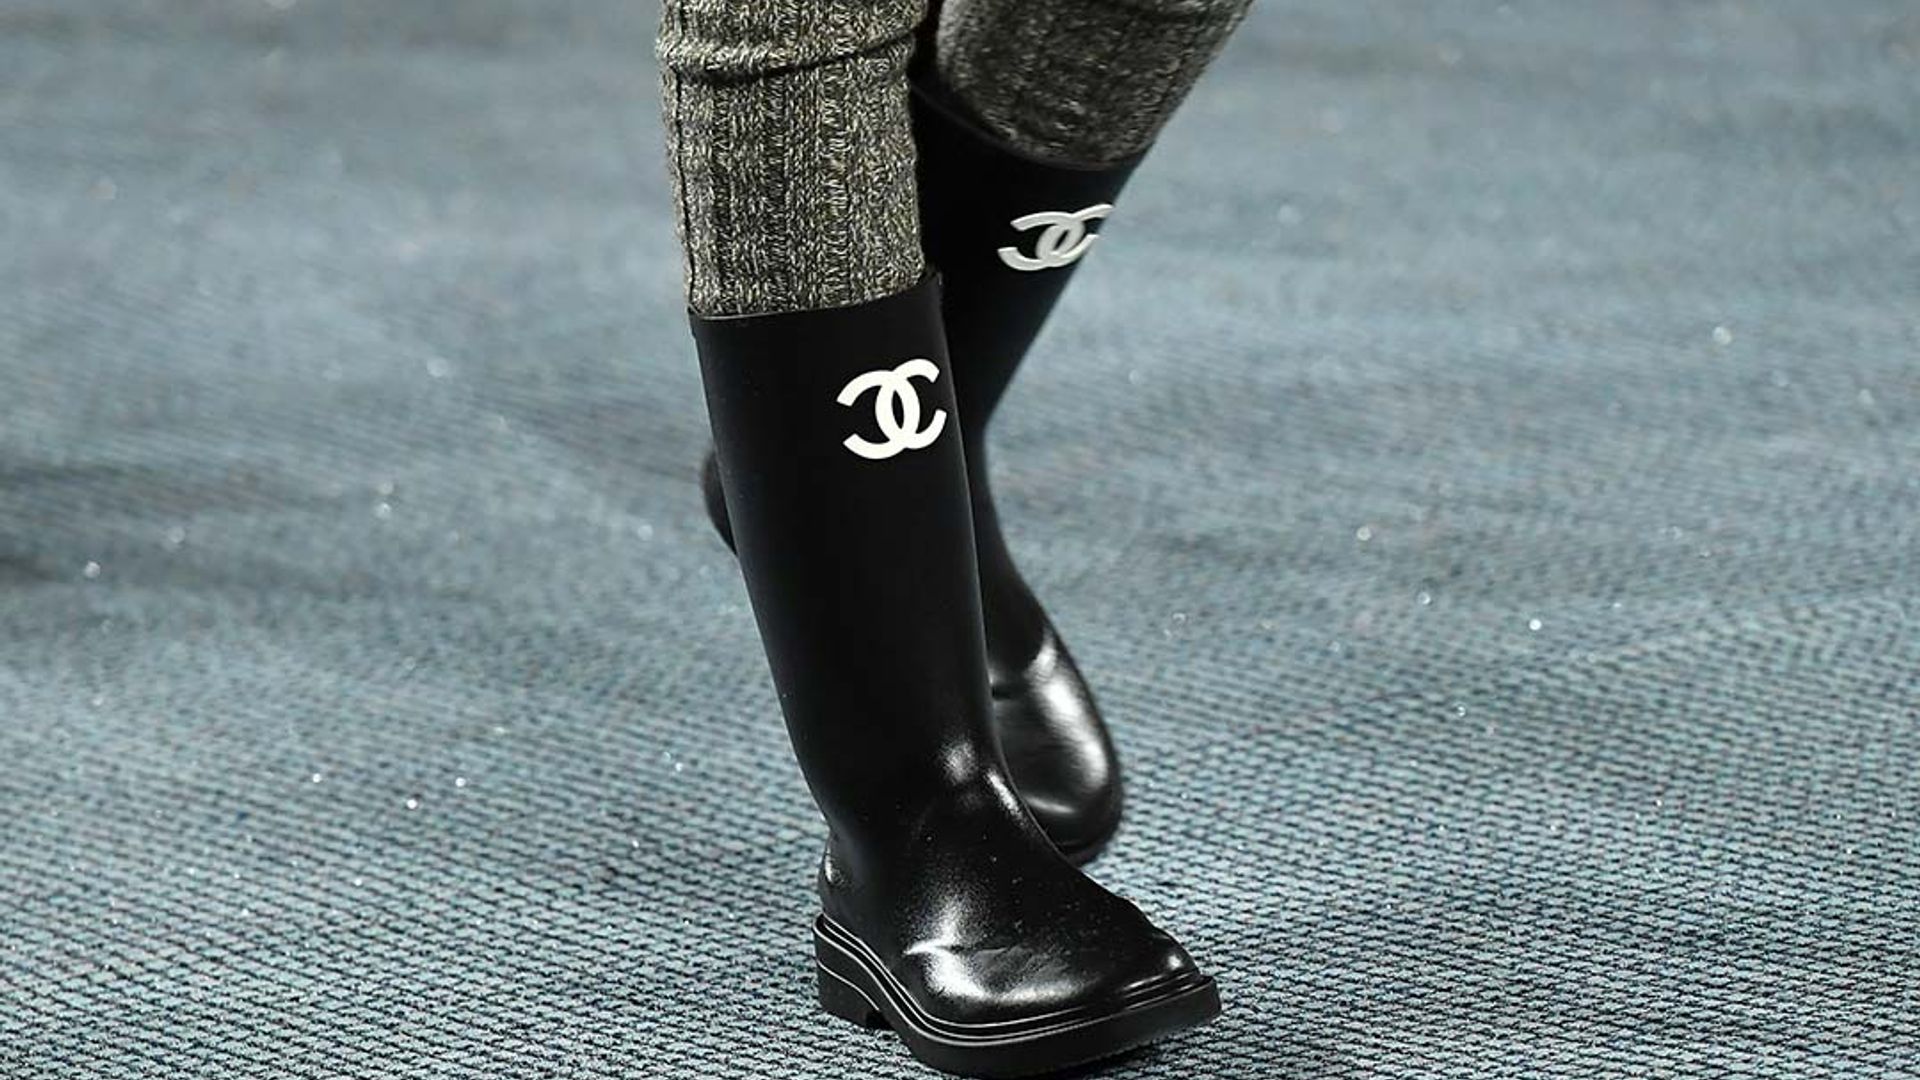 The Chanel AW22 wellies cemented the indie sleaze trend for 2022